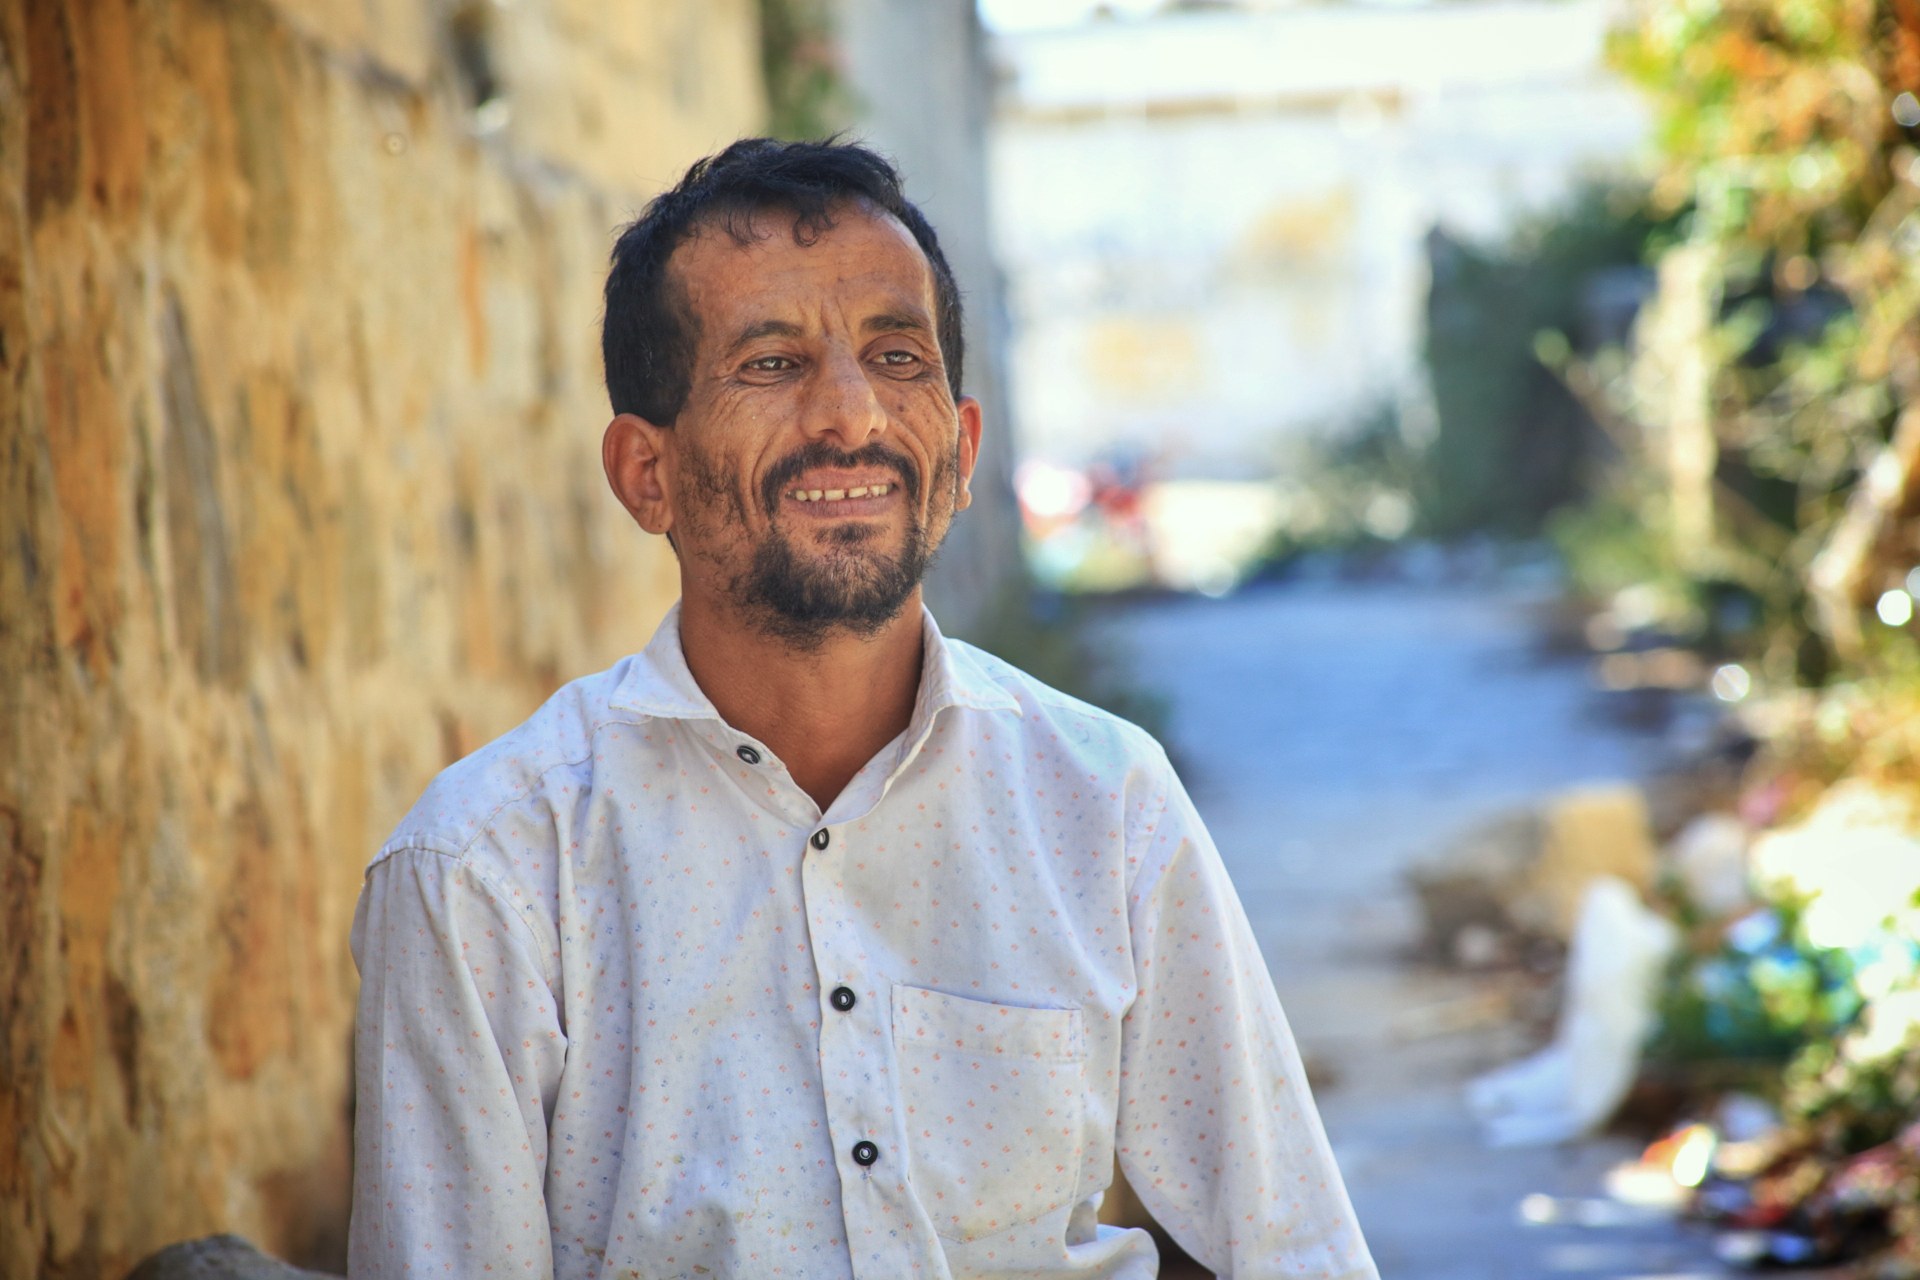 Mohammed Mukhtar fears the landmines that lie around his village in Taiz province (MEE/Khalid al-Banna)